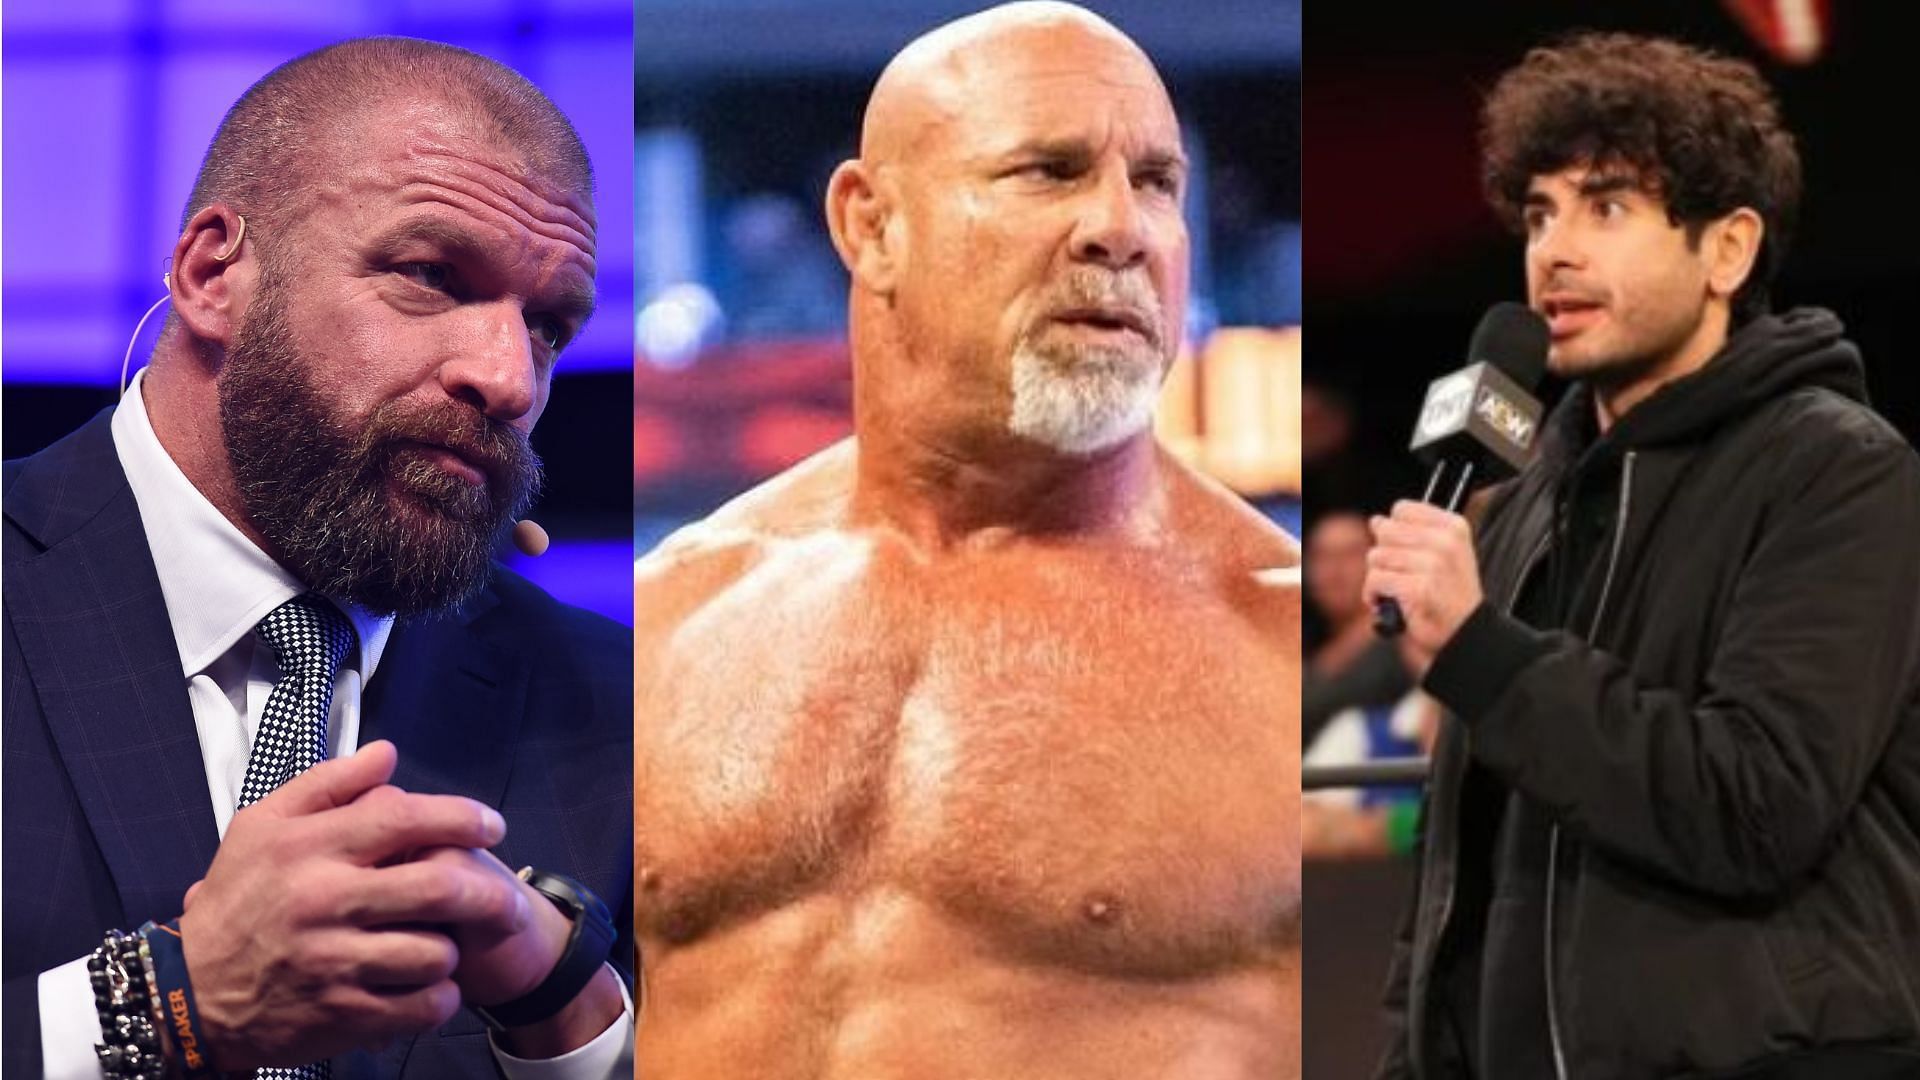 WWE and AEW need to get their check books ready for these soon-to-be free agents